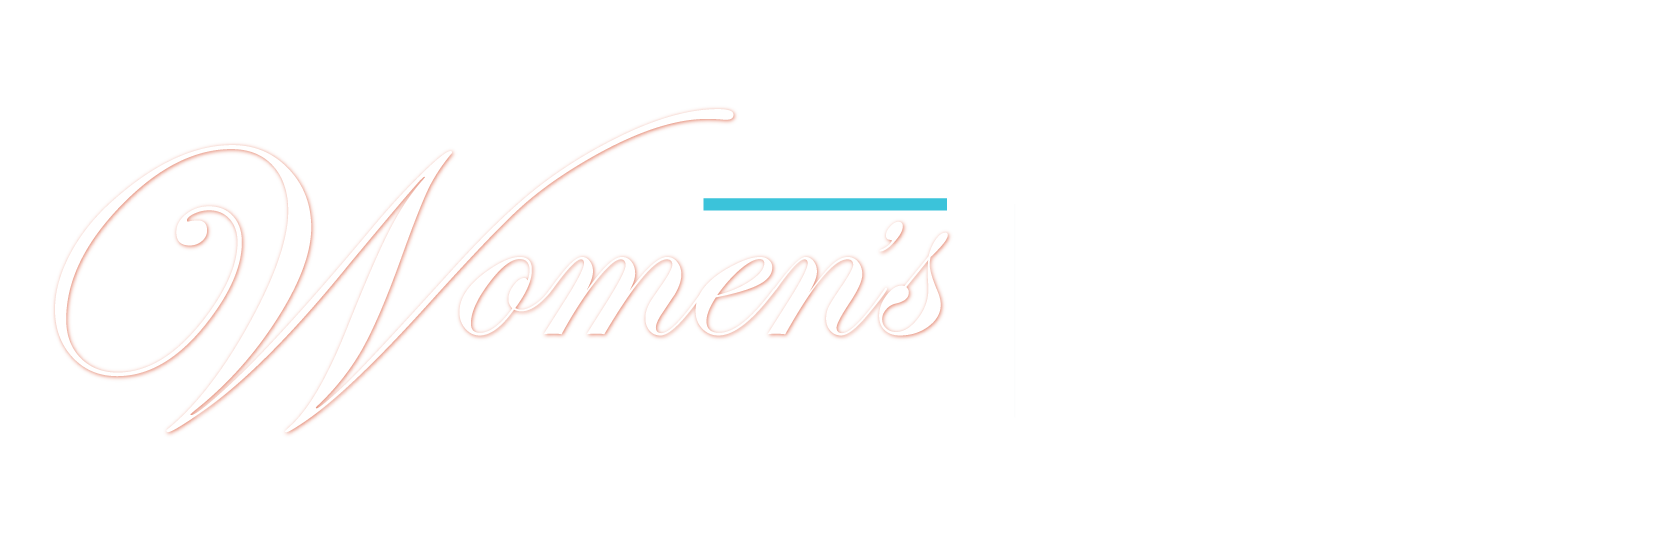 Women's History Month - Working to form a more perfect union: Honoring women in public service and government. 